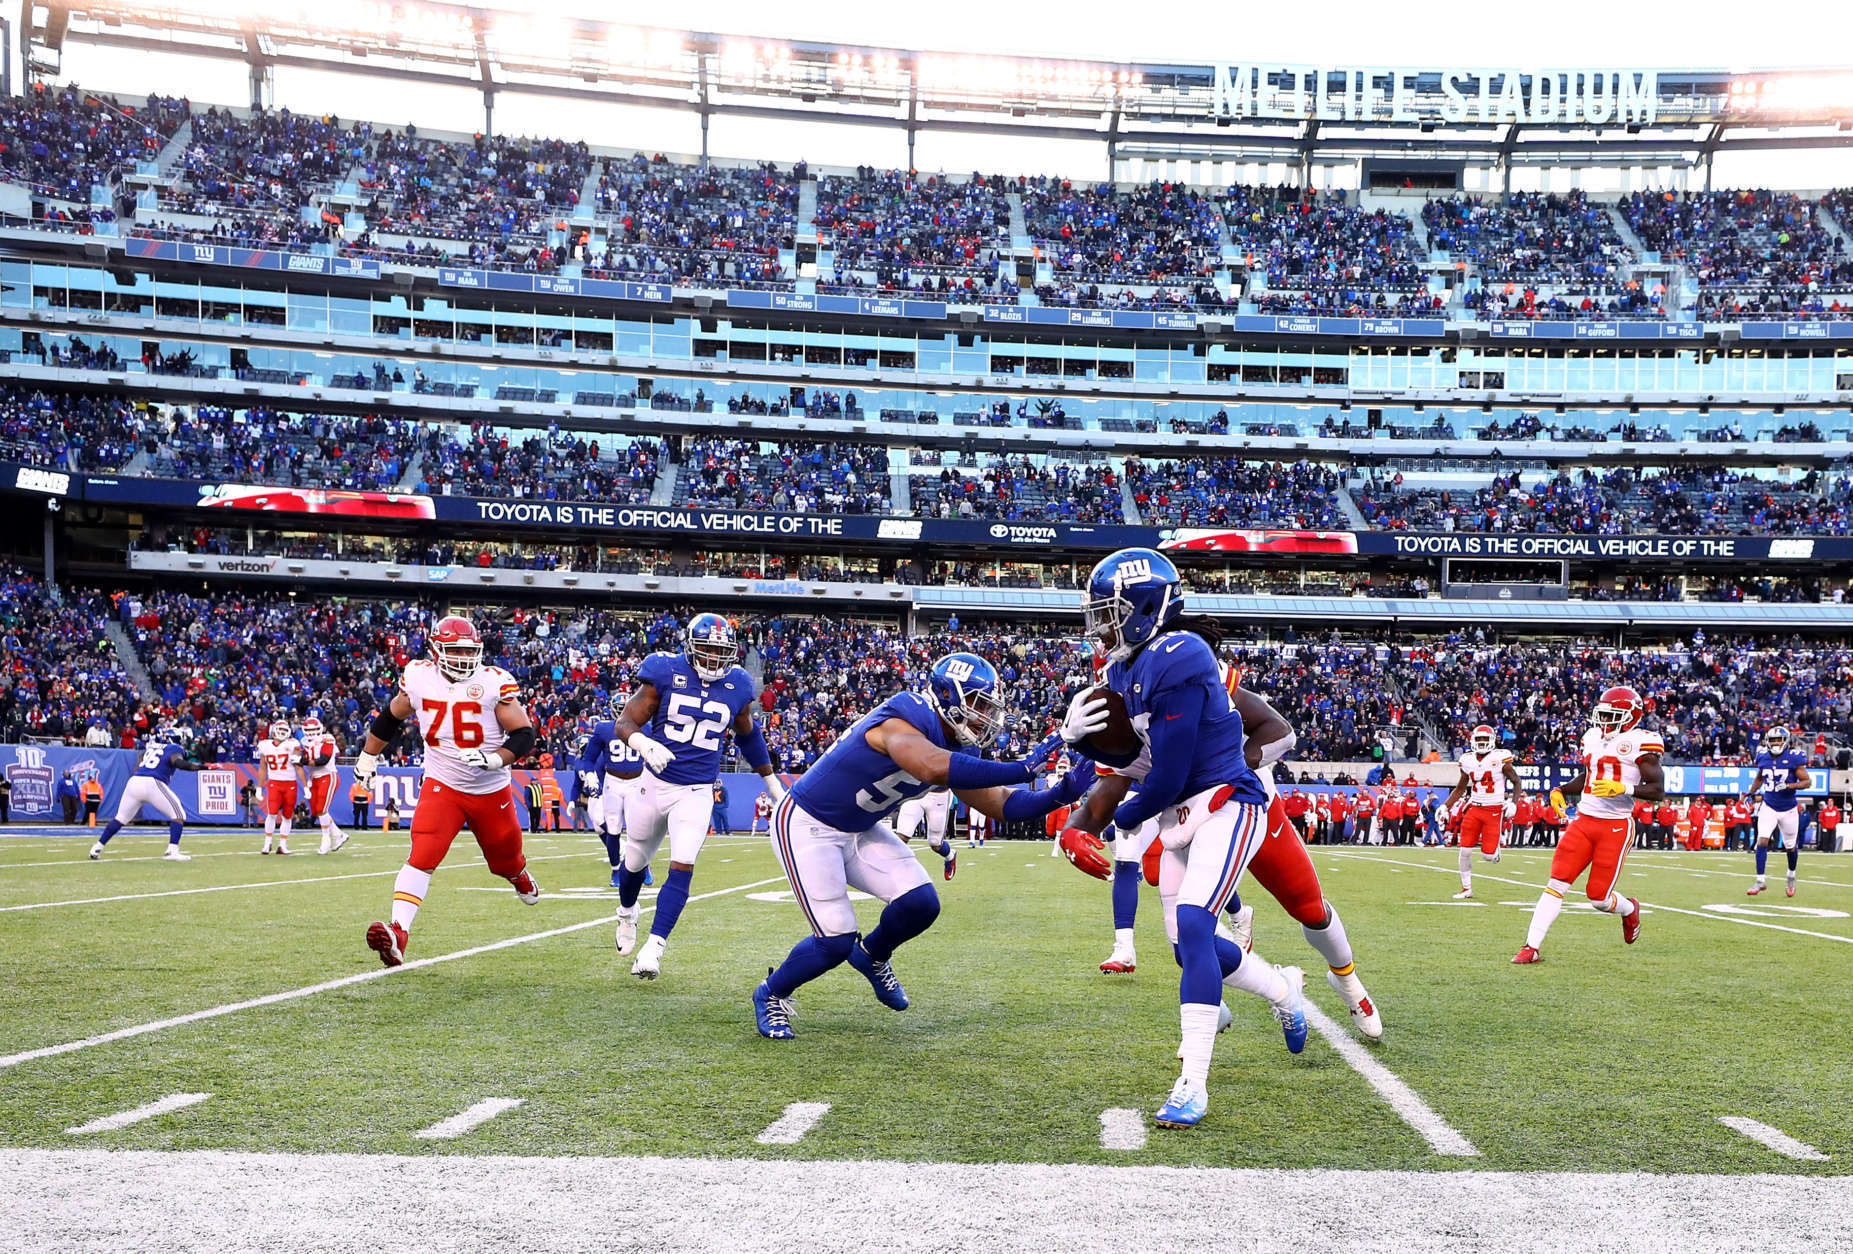 EAST RUTHERFORD, NJ - NOVEMBER 19:  Janoris Jenkins #20 of the New York Giants runs back an interception in the fourth quarter against the Kansas City Chiefs during their game at MetLife Stadium on November 19, 2017 in East Rutherford, New Jersey.  (Photo by Al Bello/Getty Images)